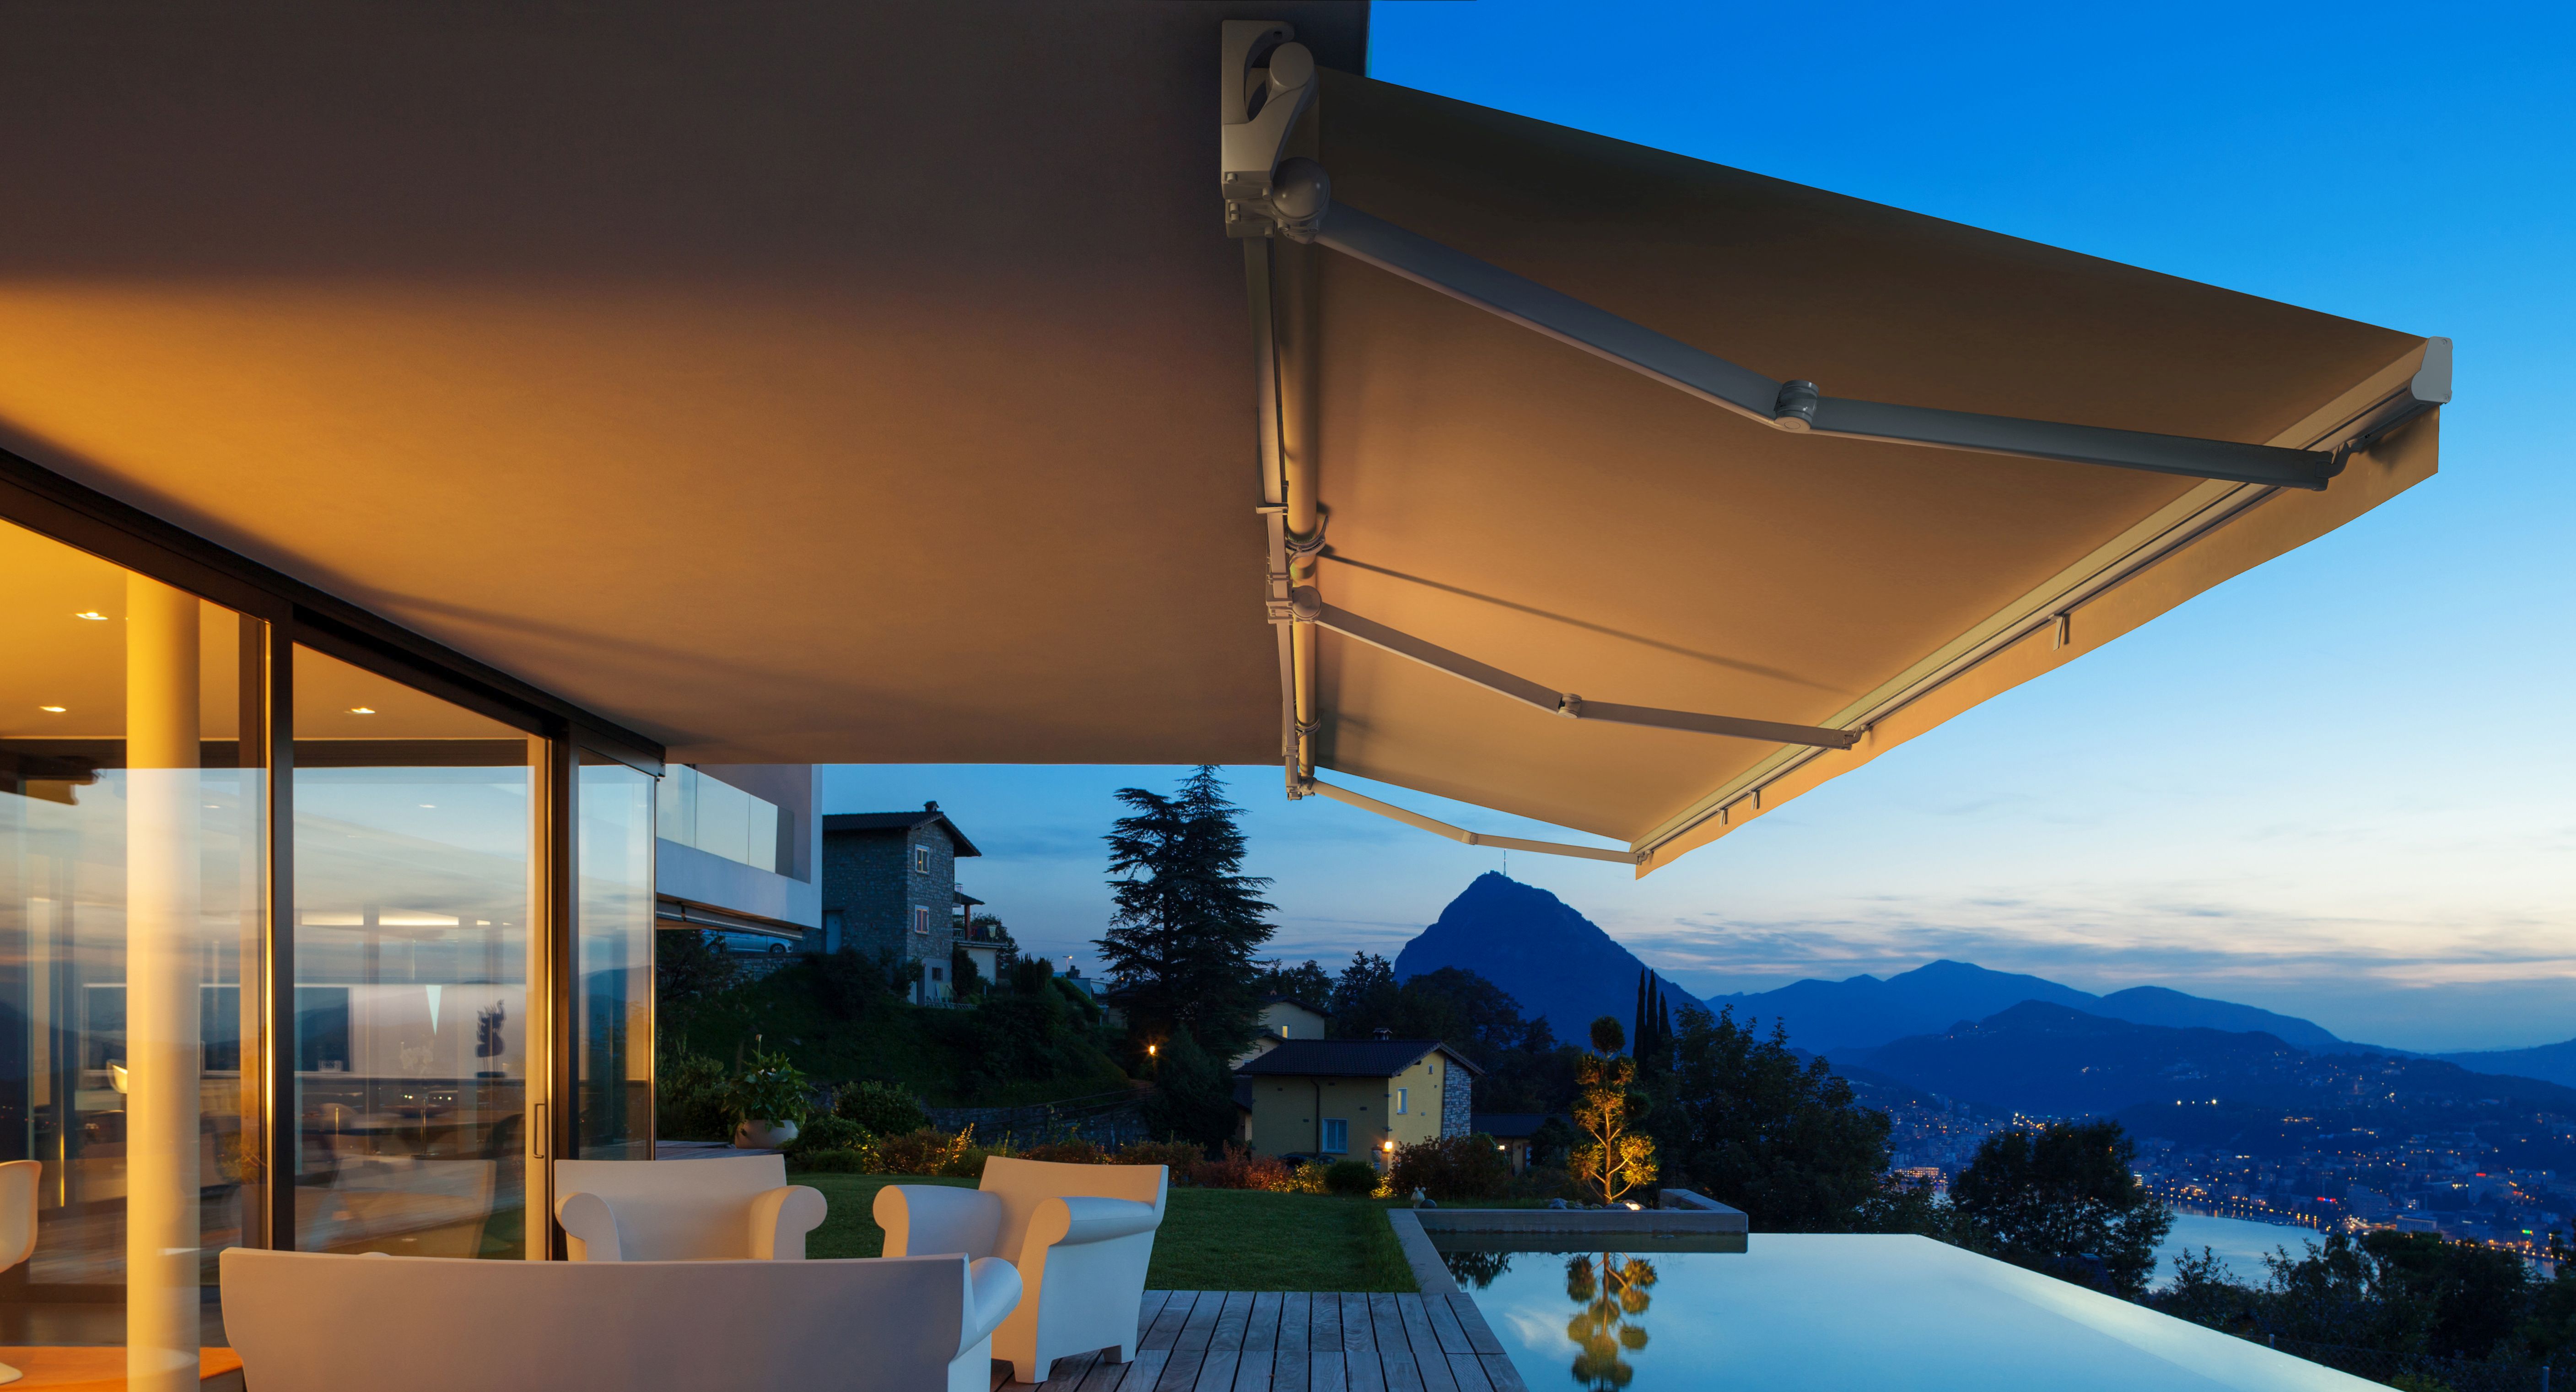 Retractable Awnings and Canopies | Manual and Motorized | Canada ...